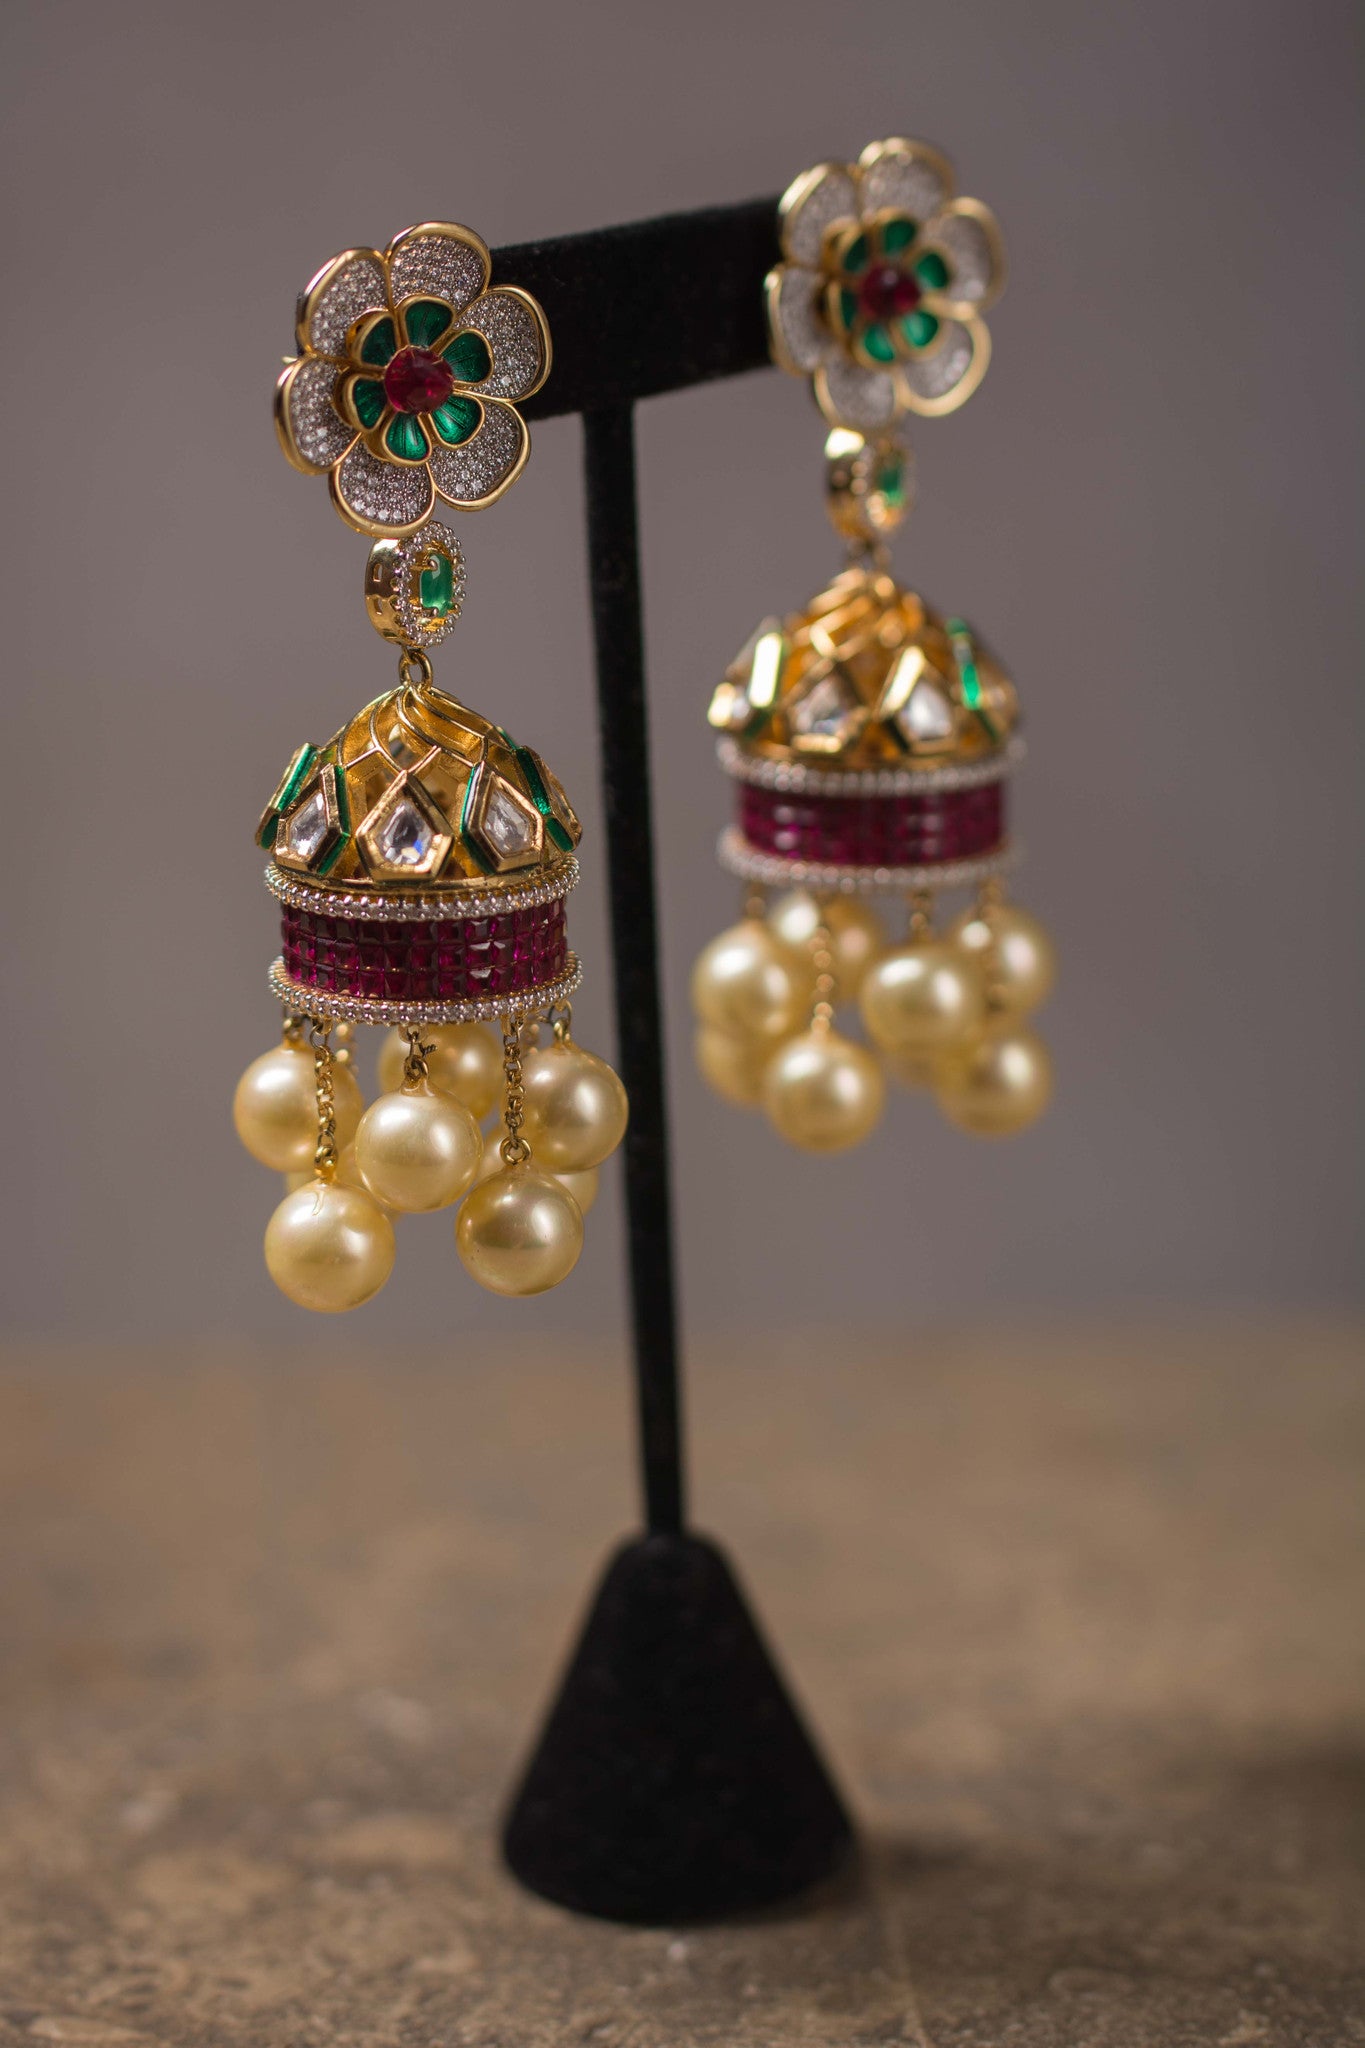 20a155-silver-gold-plated-amrapali-earrings-floral-top-pearl-multi-stone-chandelier